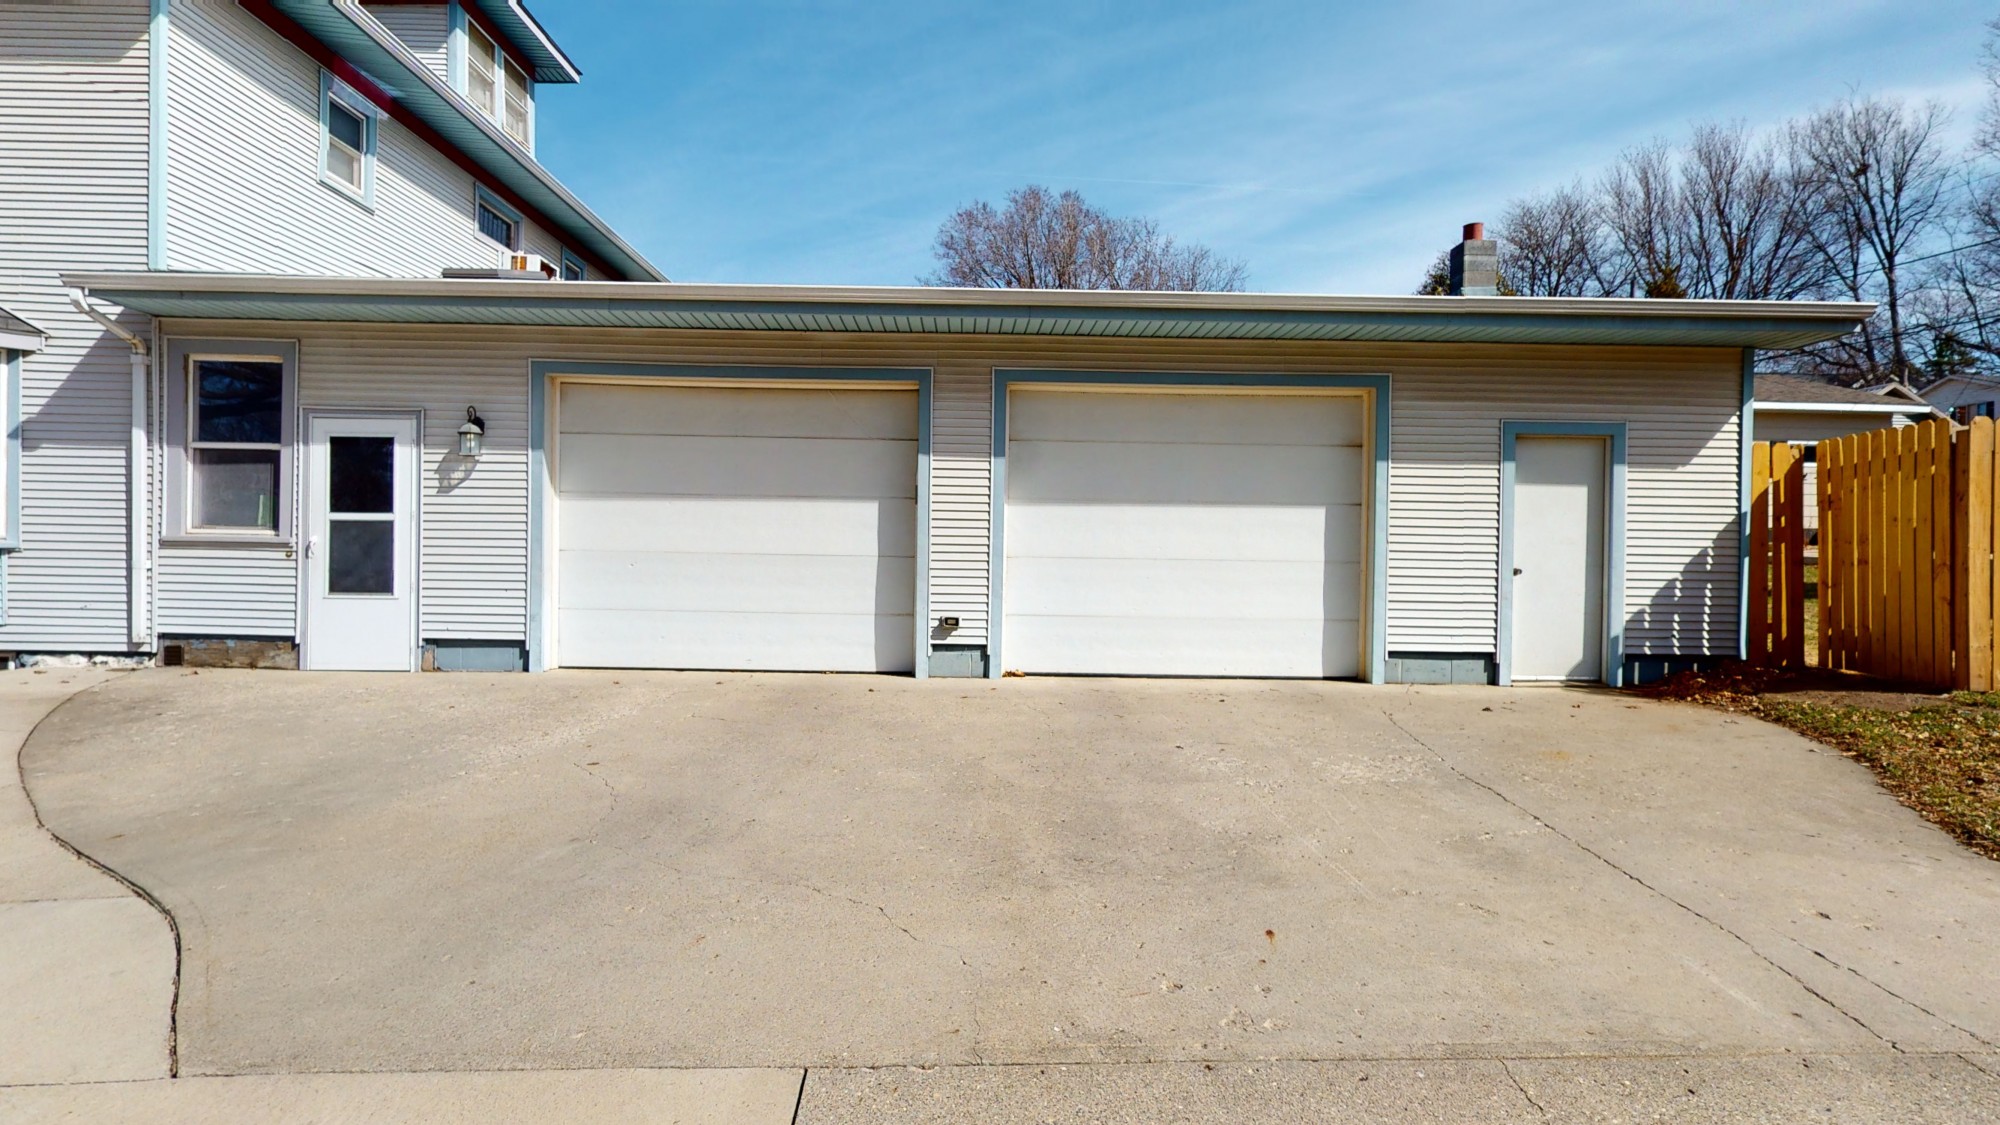 Side & Rear View of House / Property
Attached 2 Car Garage / Driveway 
Side Entry / Fenced in Yard 